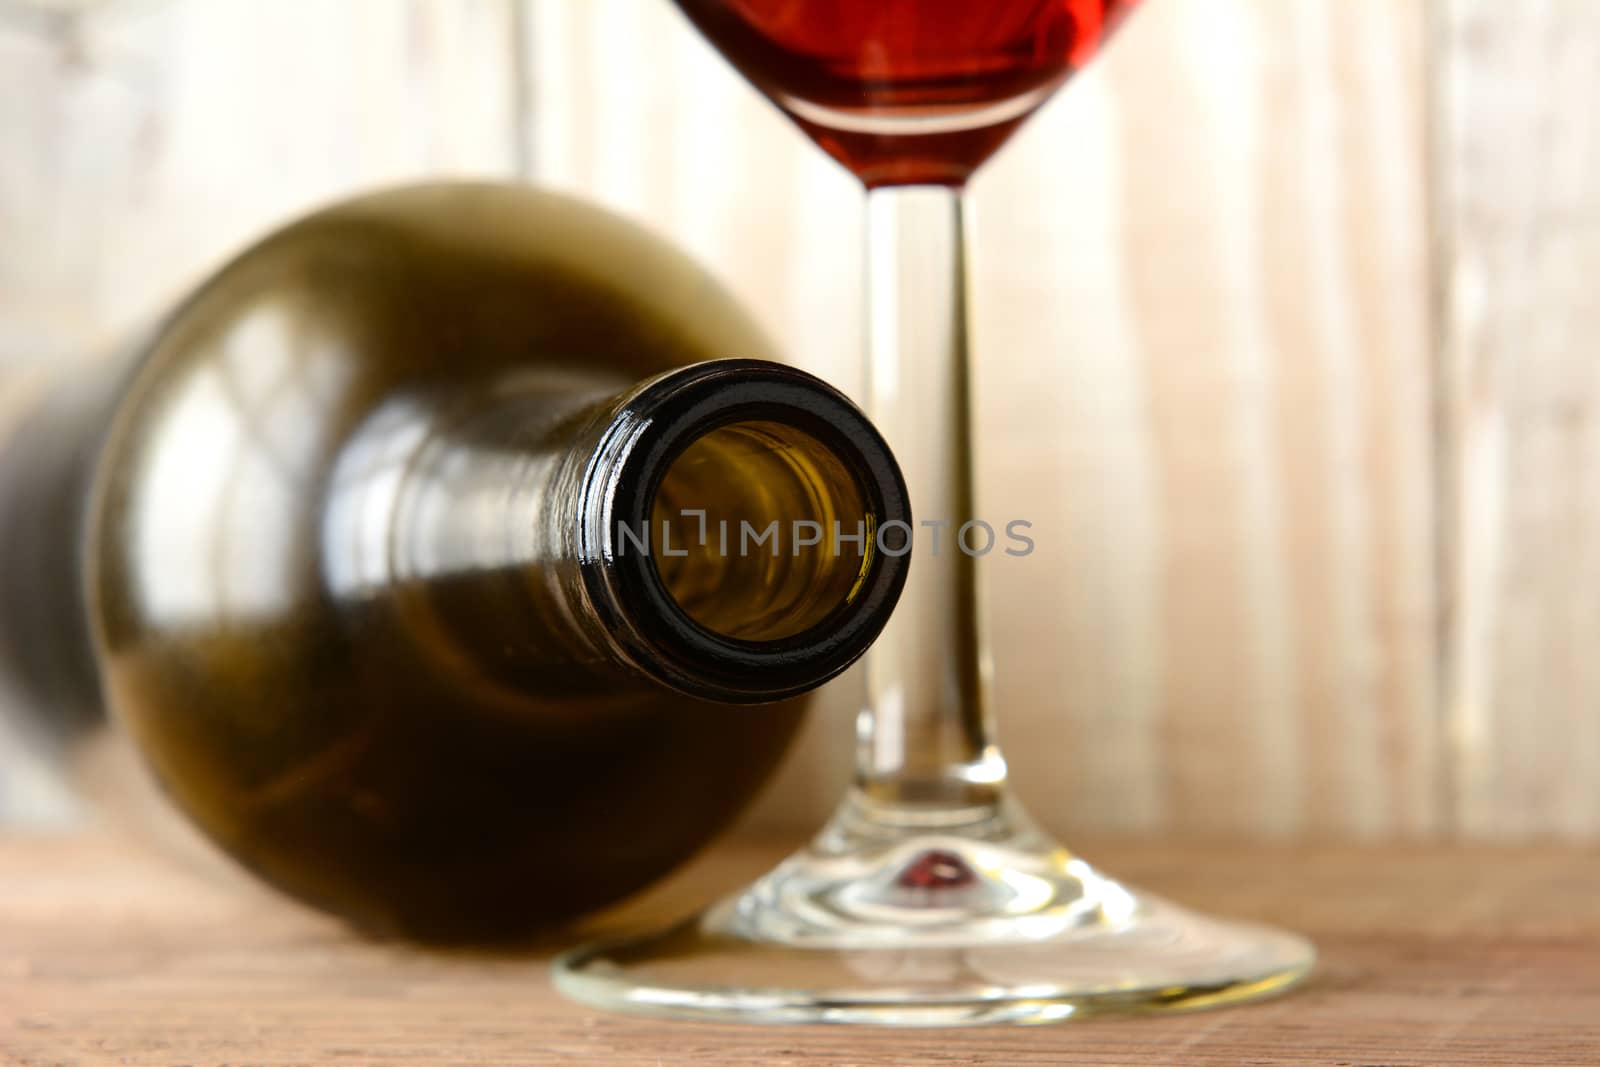 Wine still life with a bottle on its side and the bottom of a glass of red wine on a wood background. Horizontal format with shallow depth of field. 